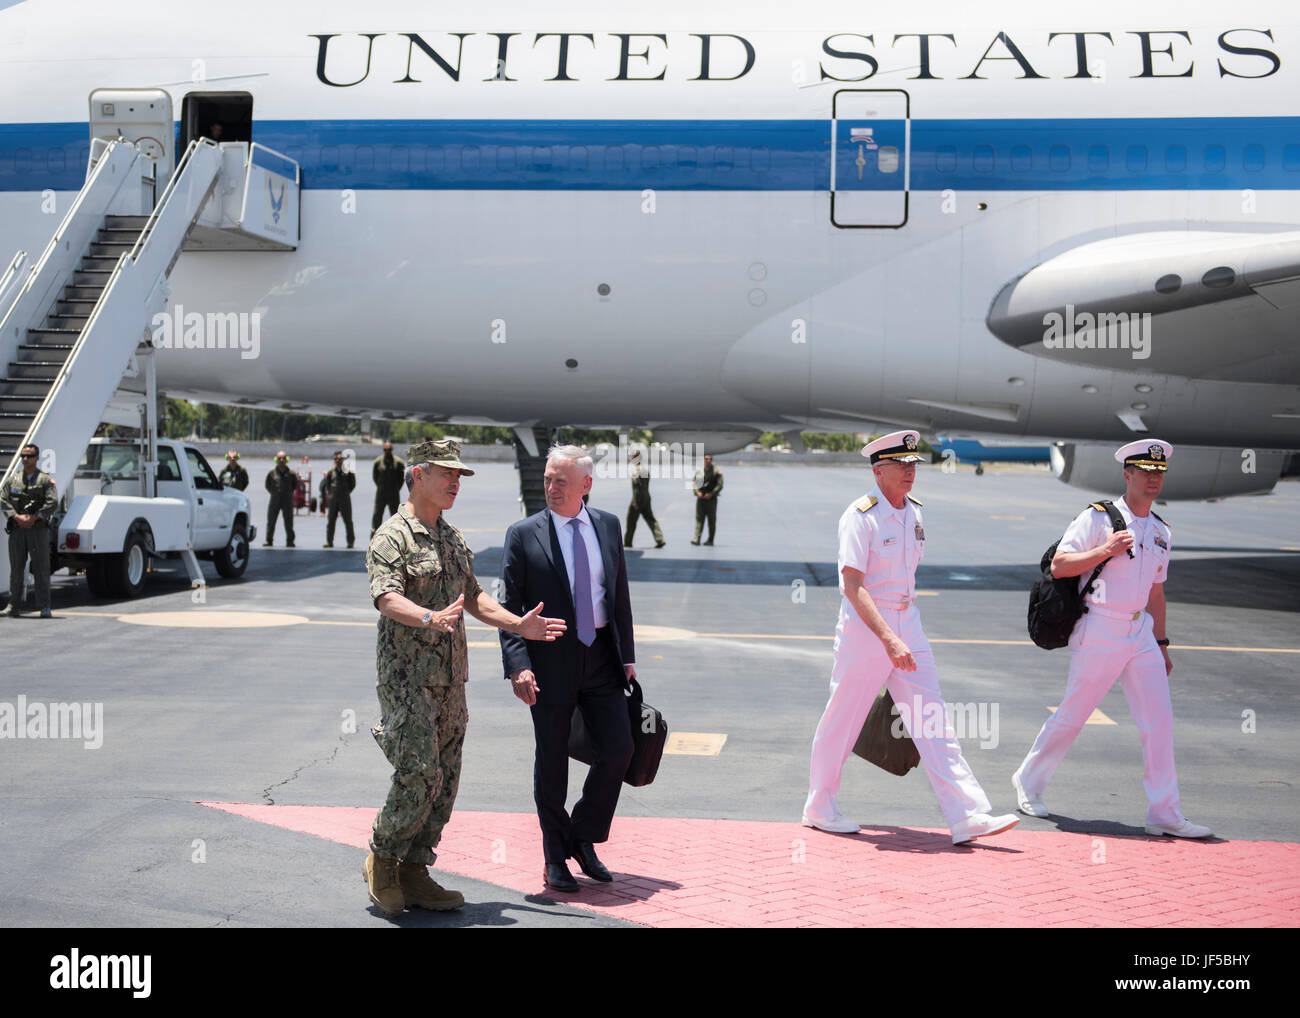 170529-N-ON707-178JOINT BASE PEARL HARBOR-HICKAM, Hawaii (May 31, 2017)— Adm. Harry Harris, Commander of U.S. Pacific Command (PACOM), has a conversation with Secretary of Defense James Mattis after his arrival at Hickam Airfield. This is the first time Mattis has visited PACOM since holding the office of Secretary of Defense. (U.S. Navy photo by Mass Communication 2nd Class James Mullen/Released) Stock Photo